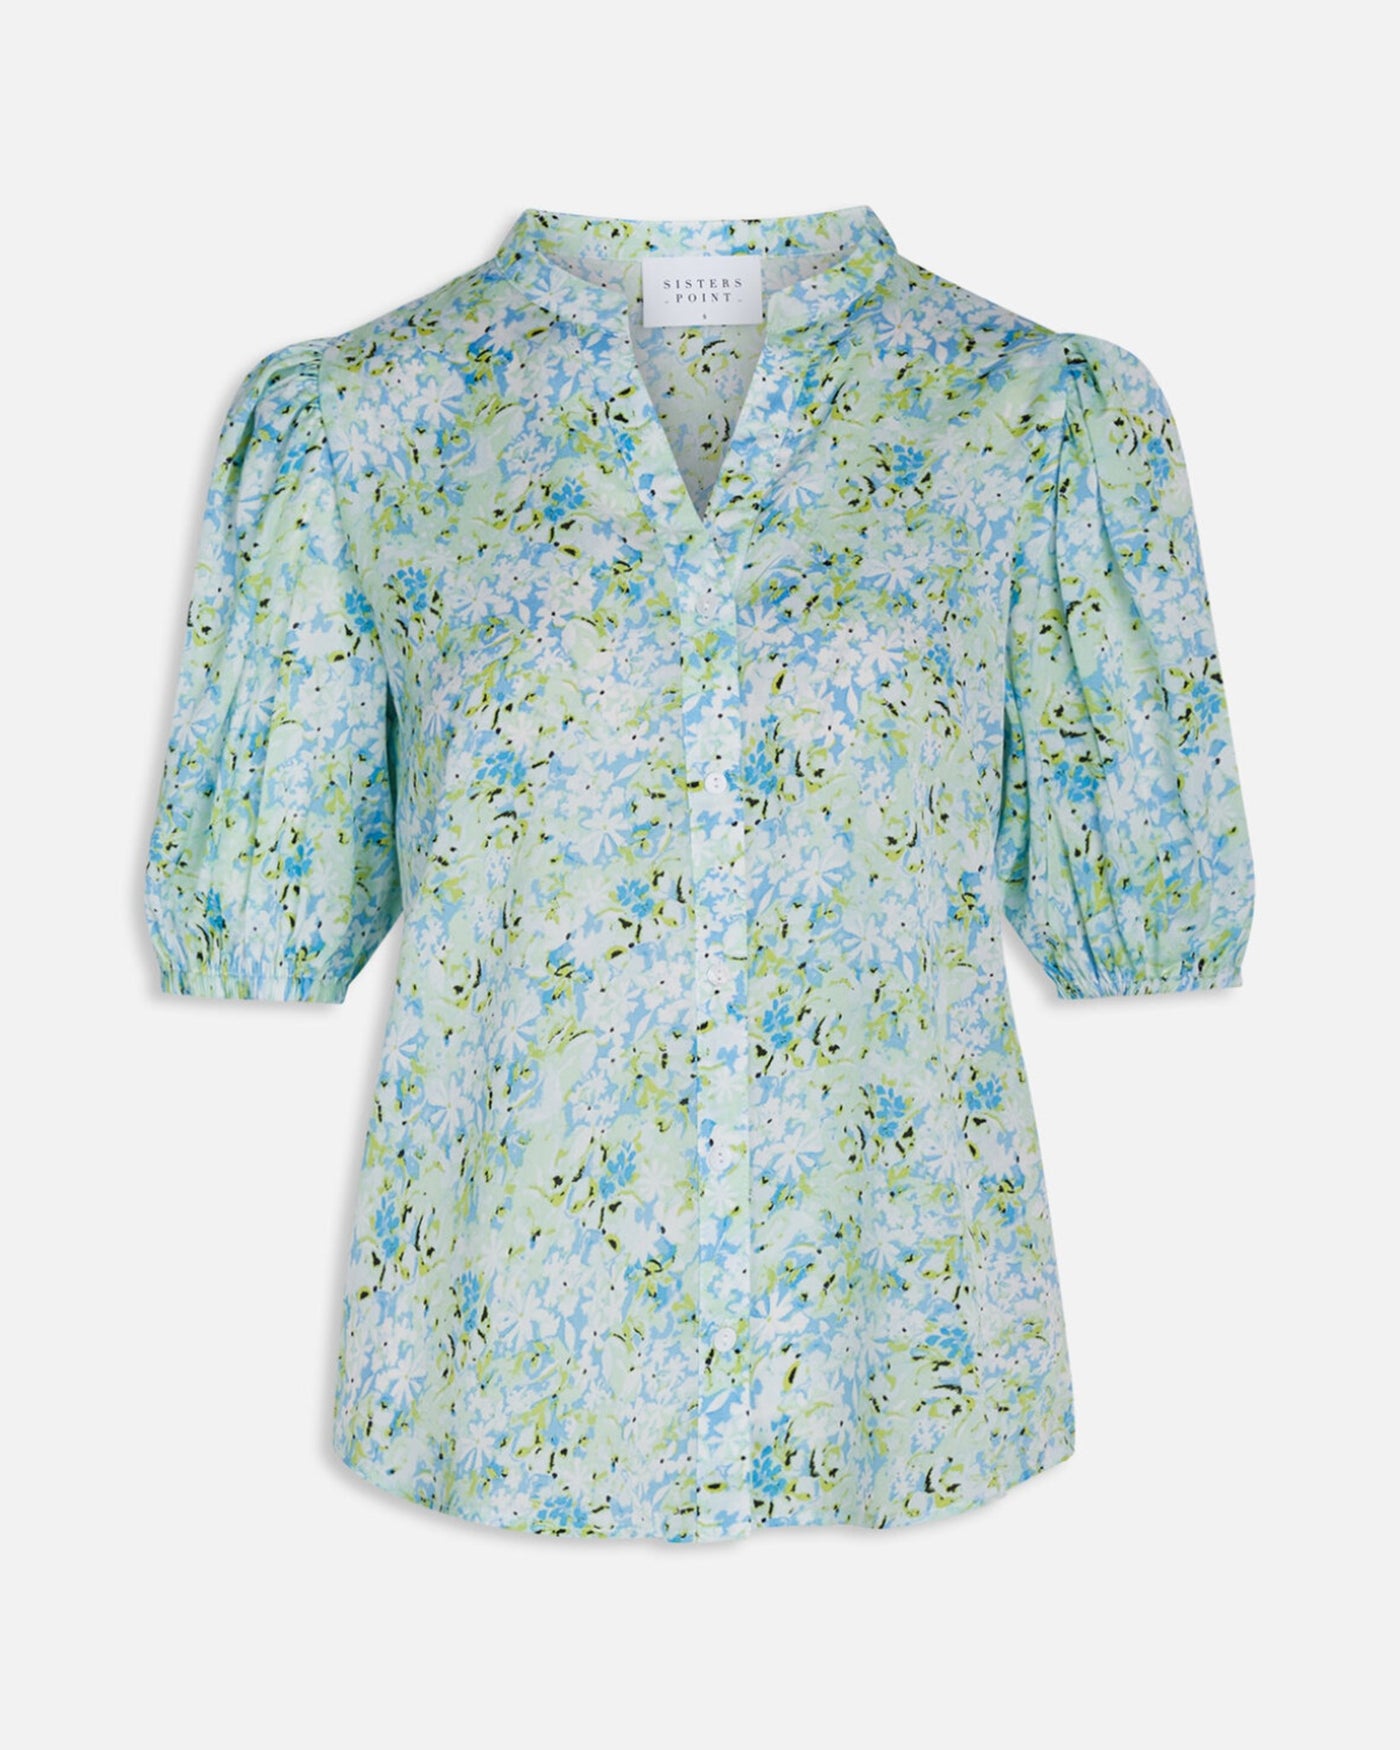 Varia Bluse - Blue/Green Flower - Sisters Point 3